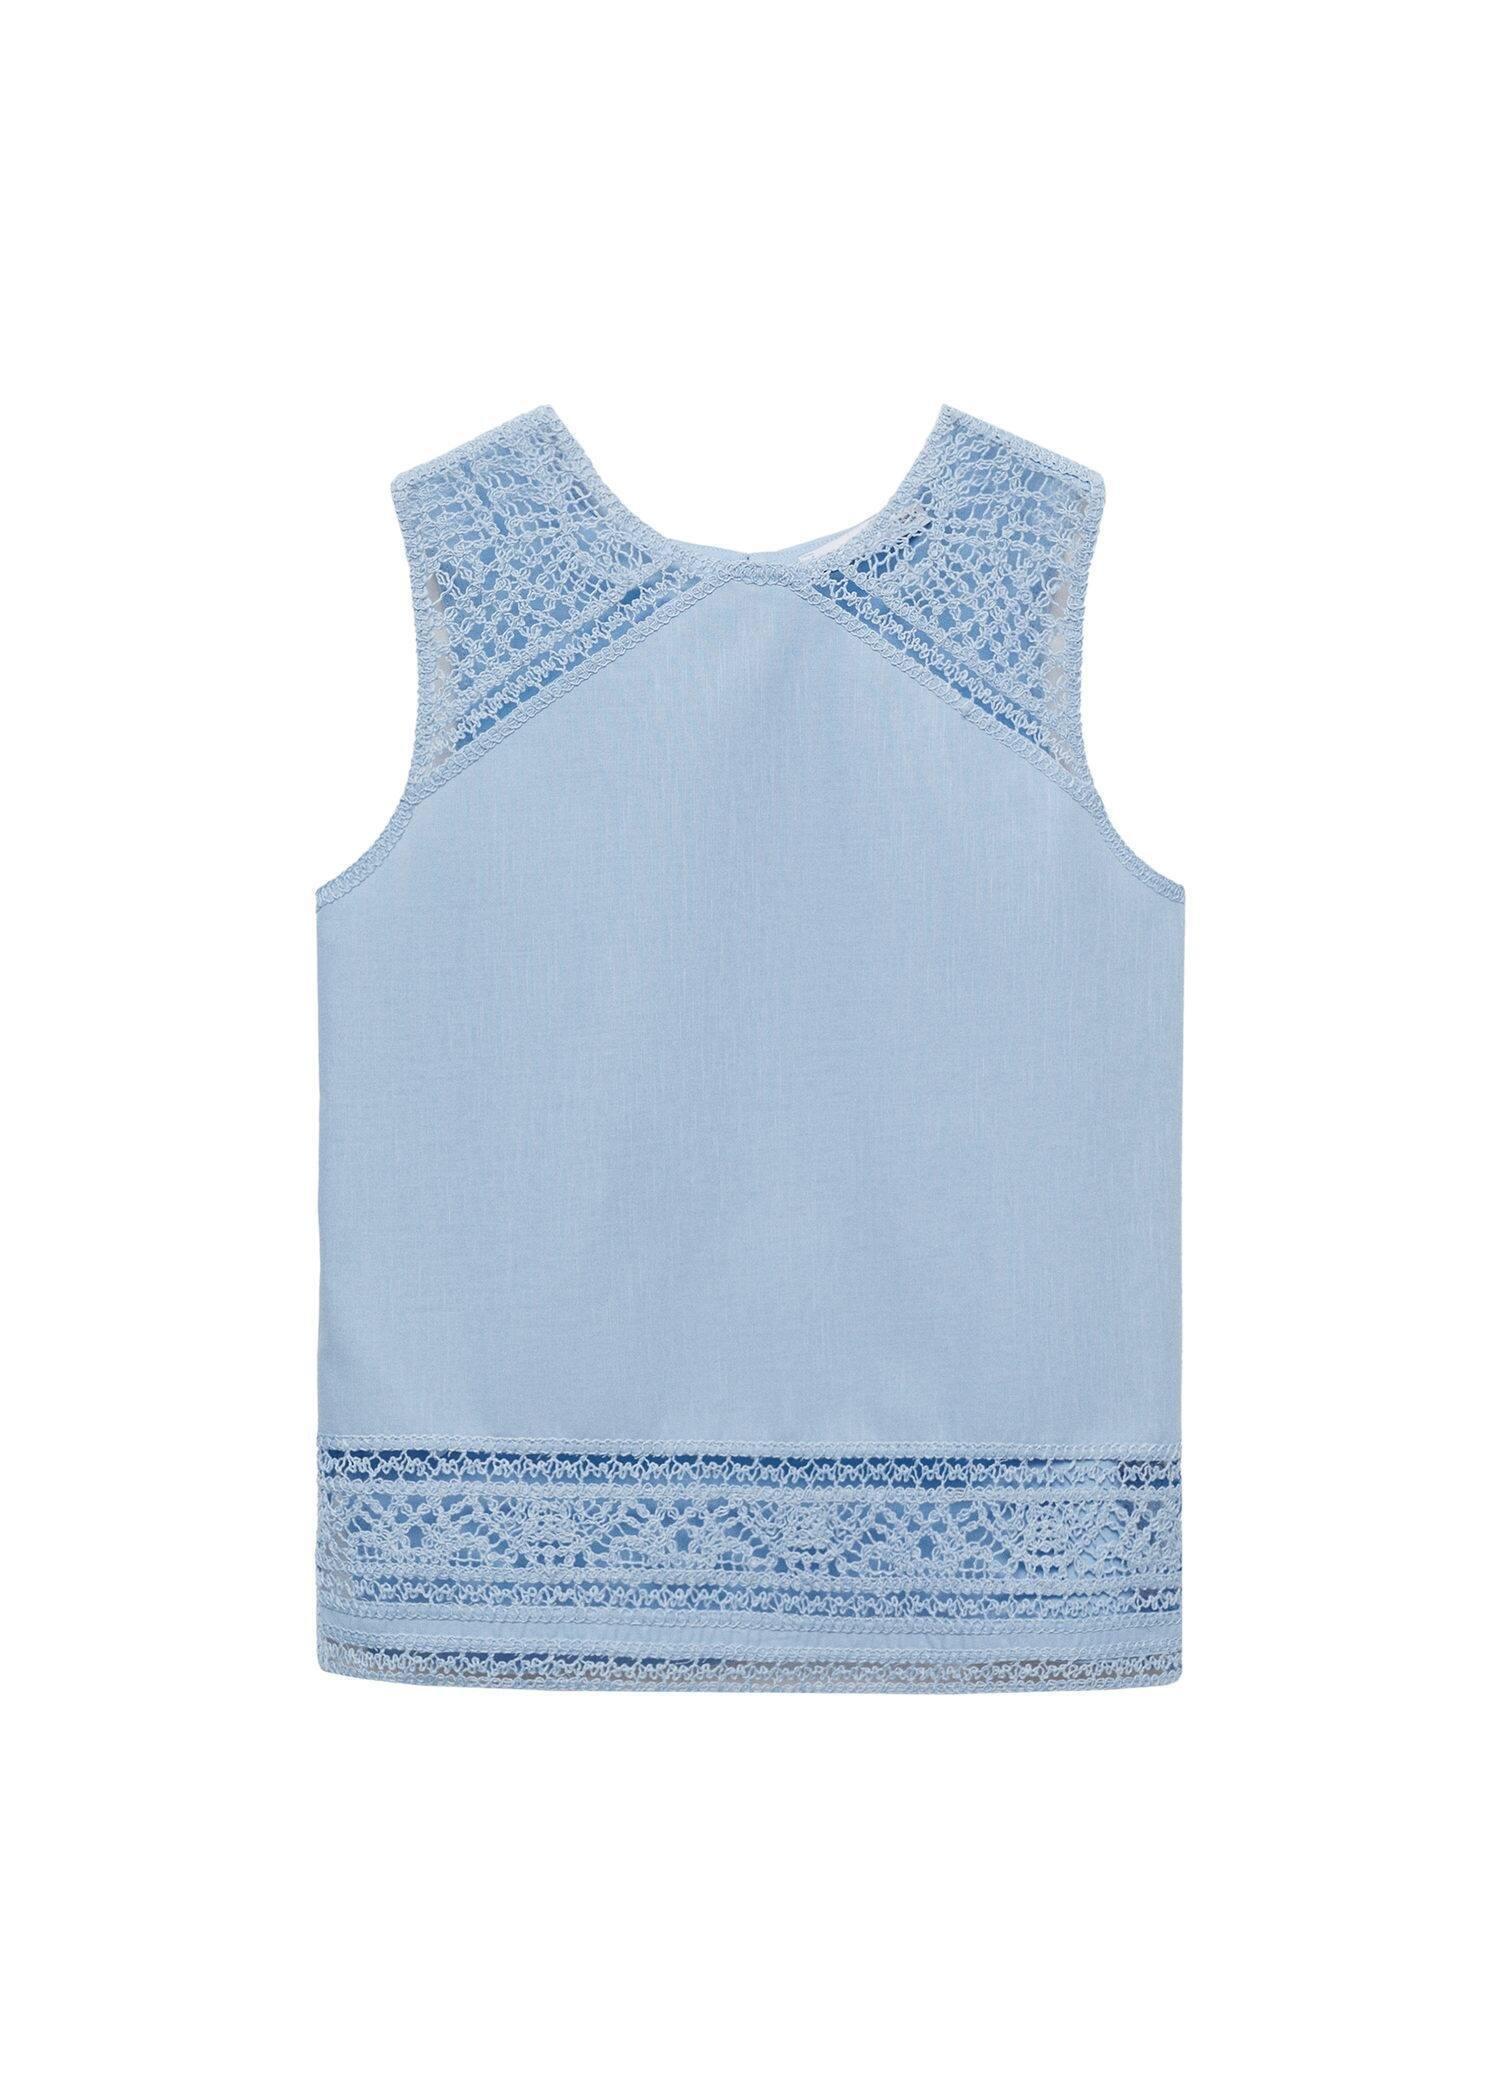 Mango - Blue Embroidered Cotton Top